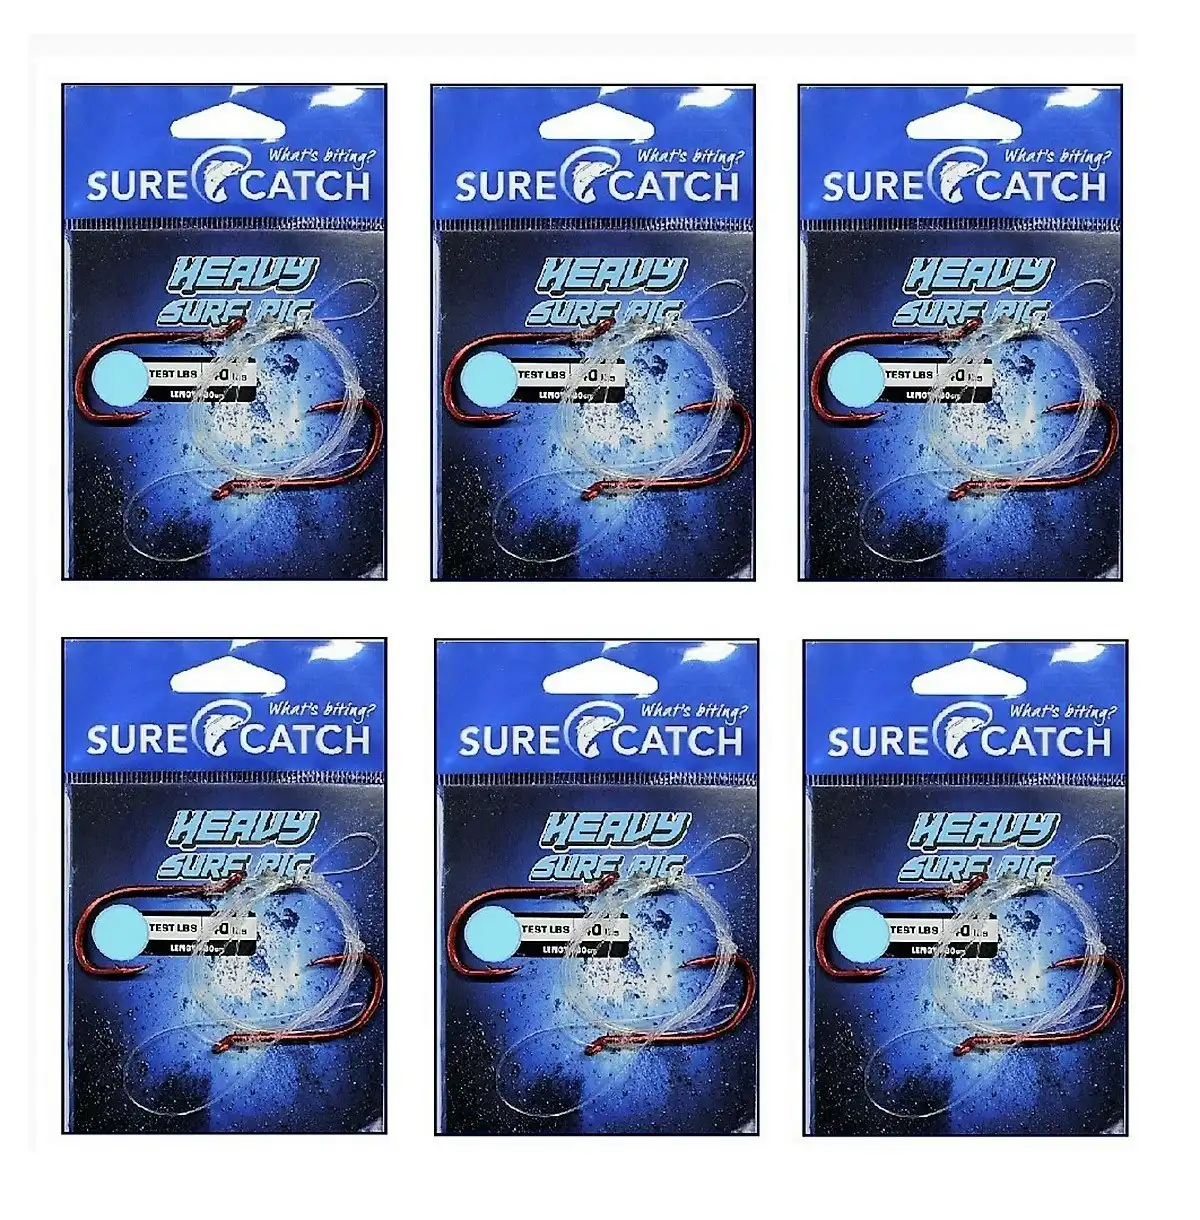 6 Pack of Surecatch Pre-Tied Heavy Surf Rigs with Chemically